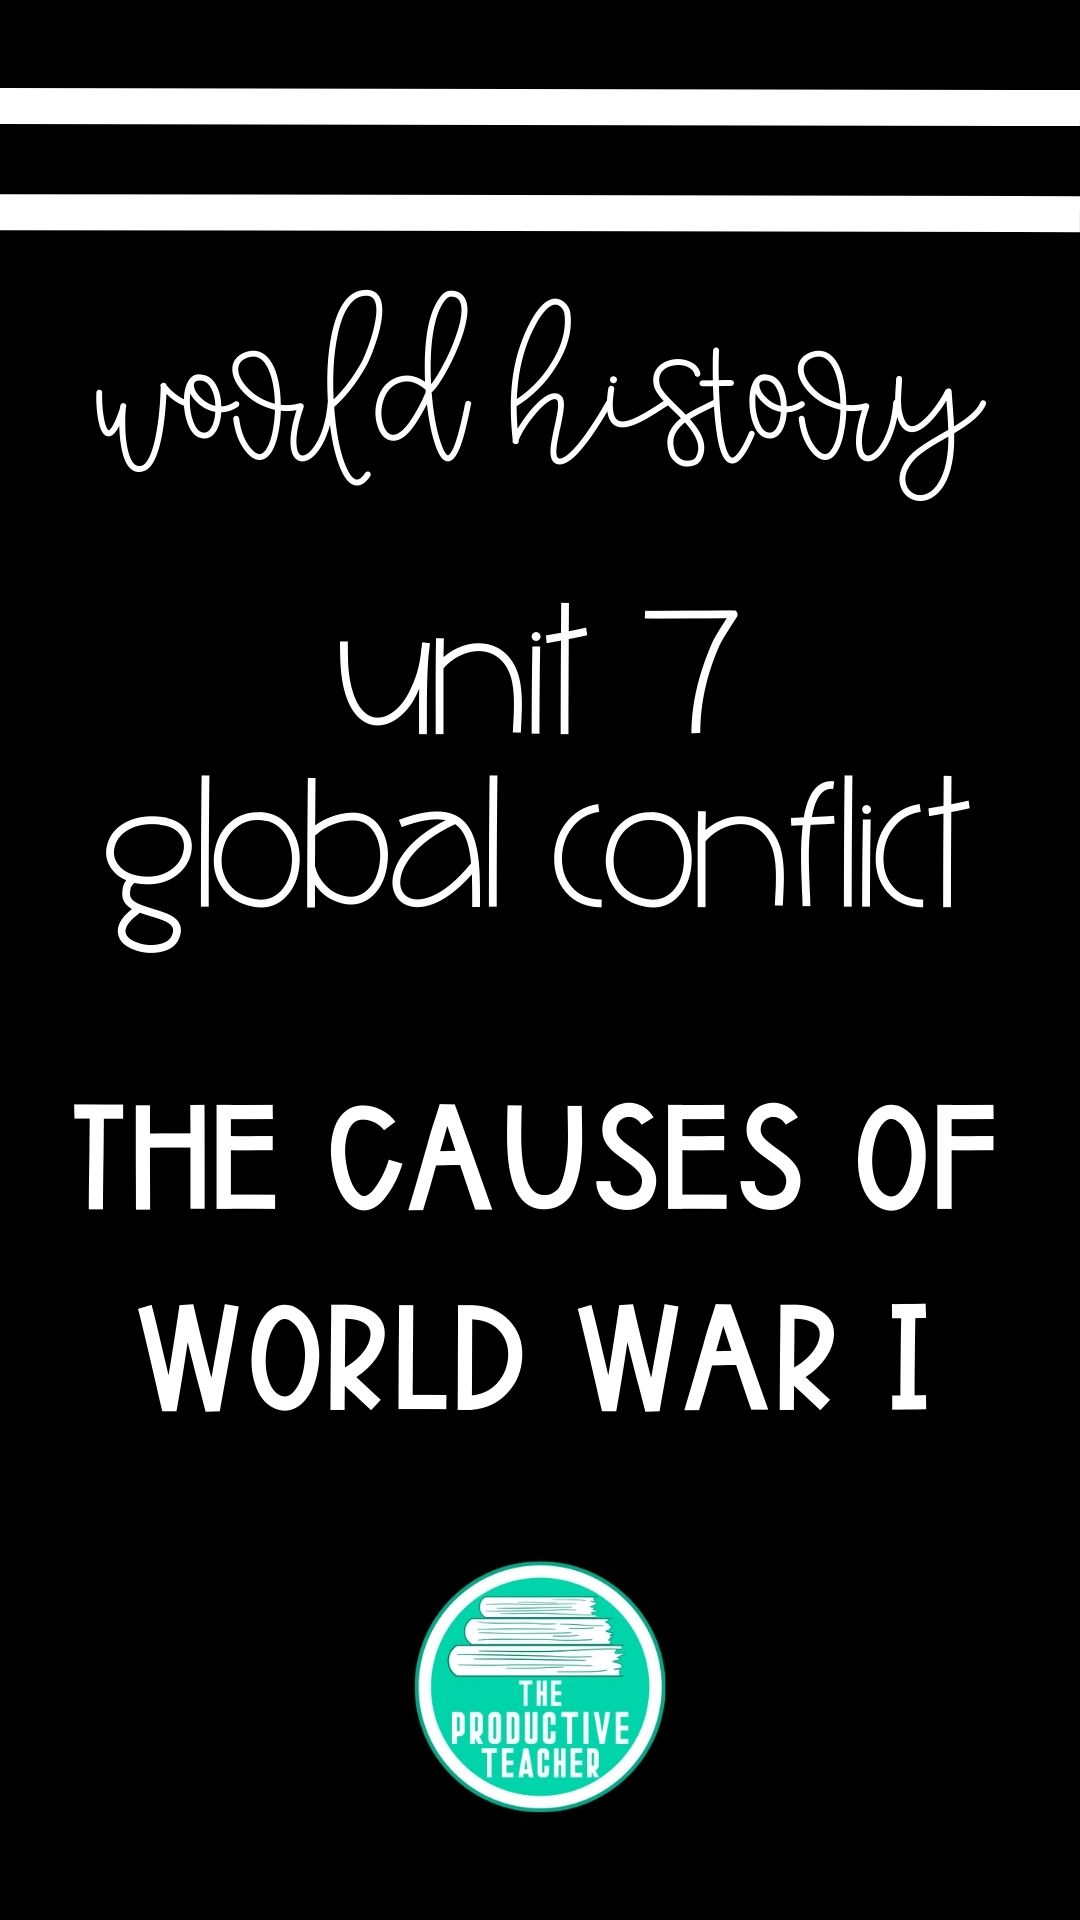 the causes of World War I